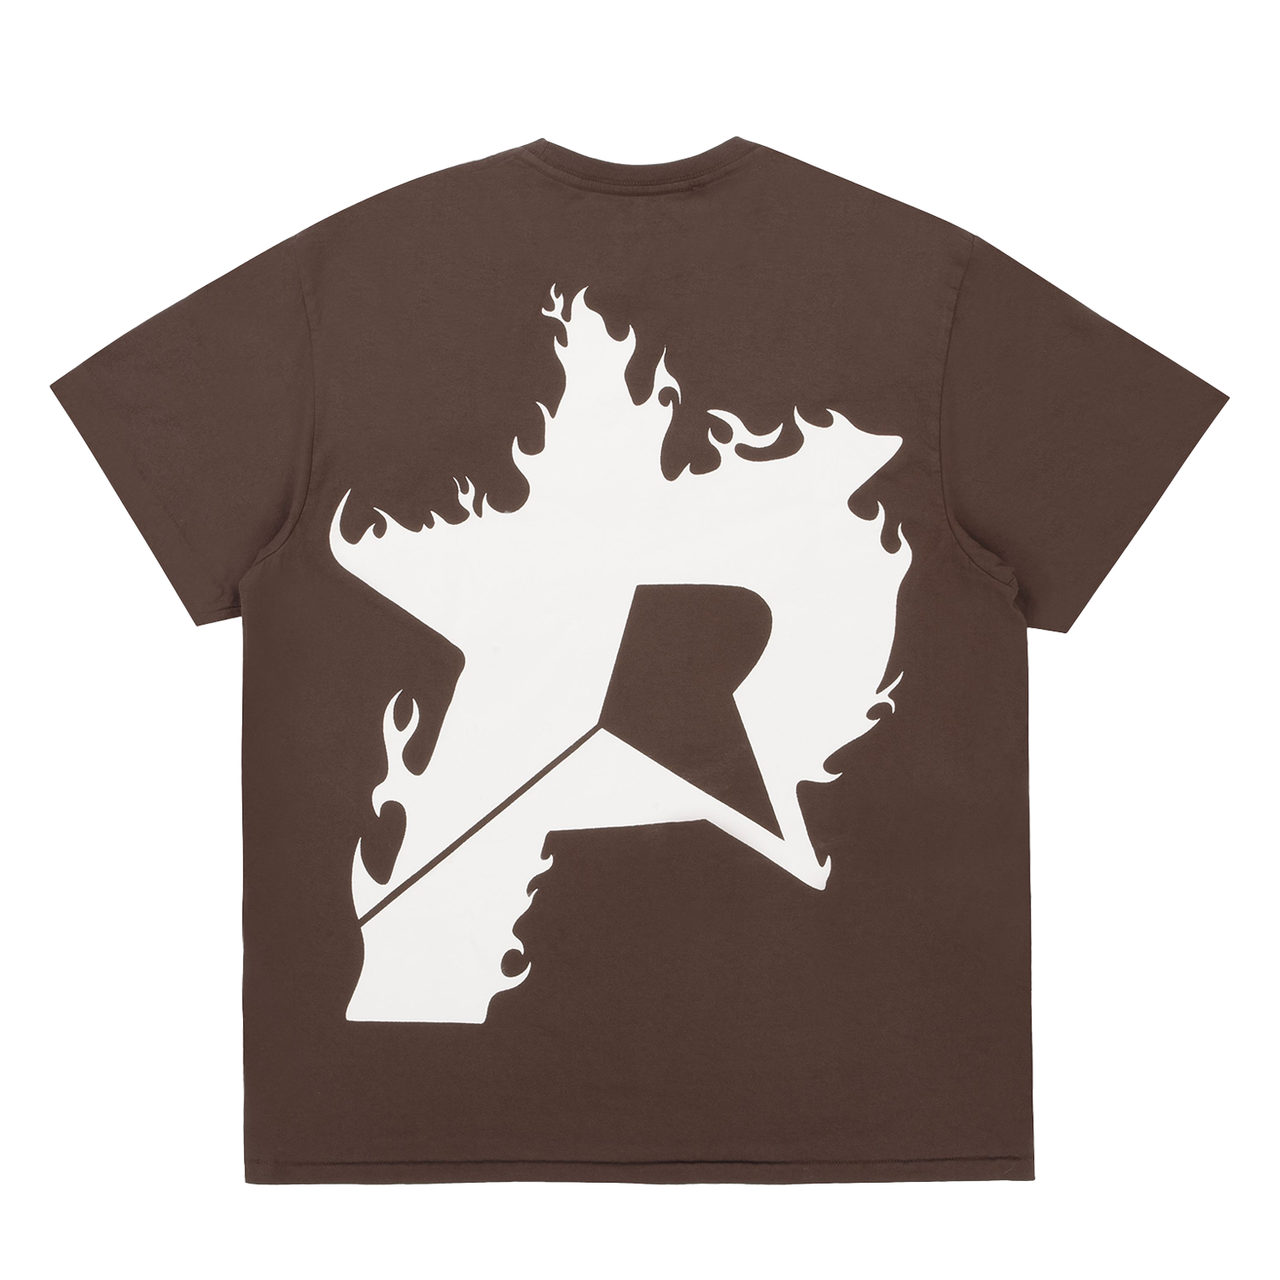 Pieces P Star Flames Tee Chocolate